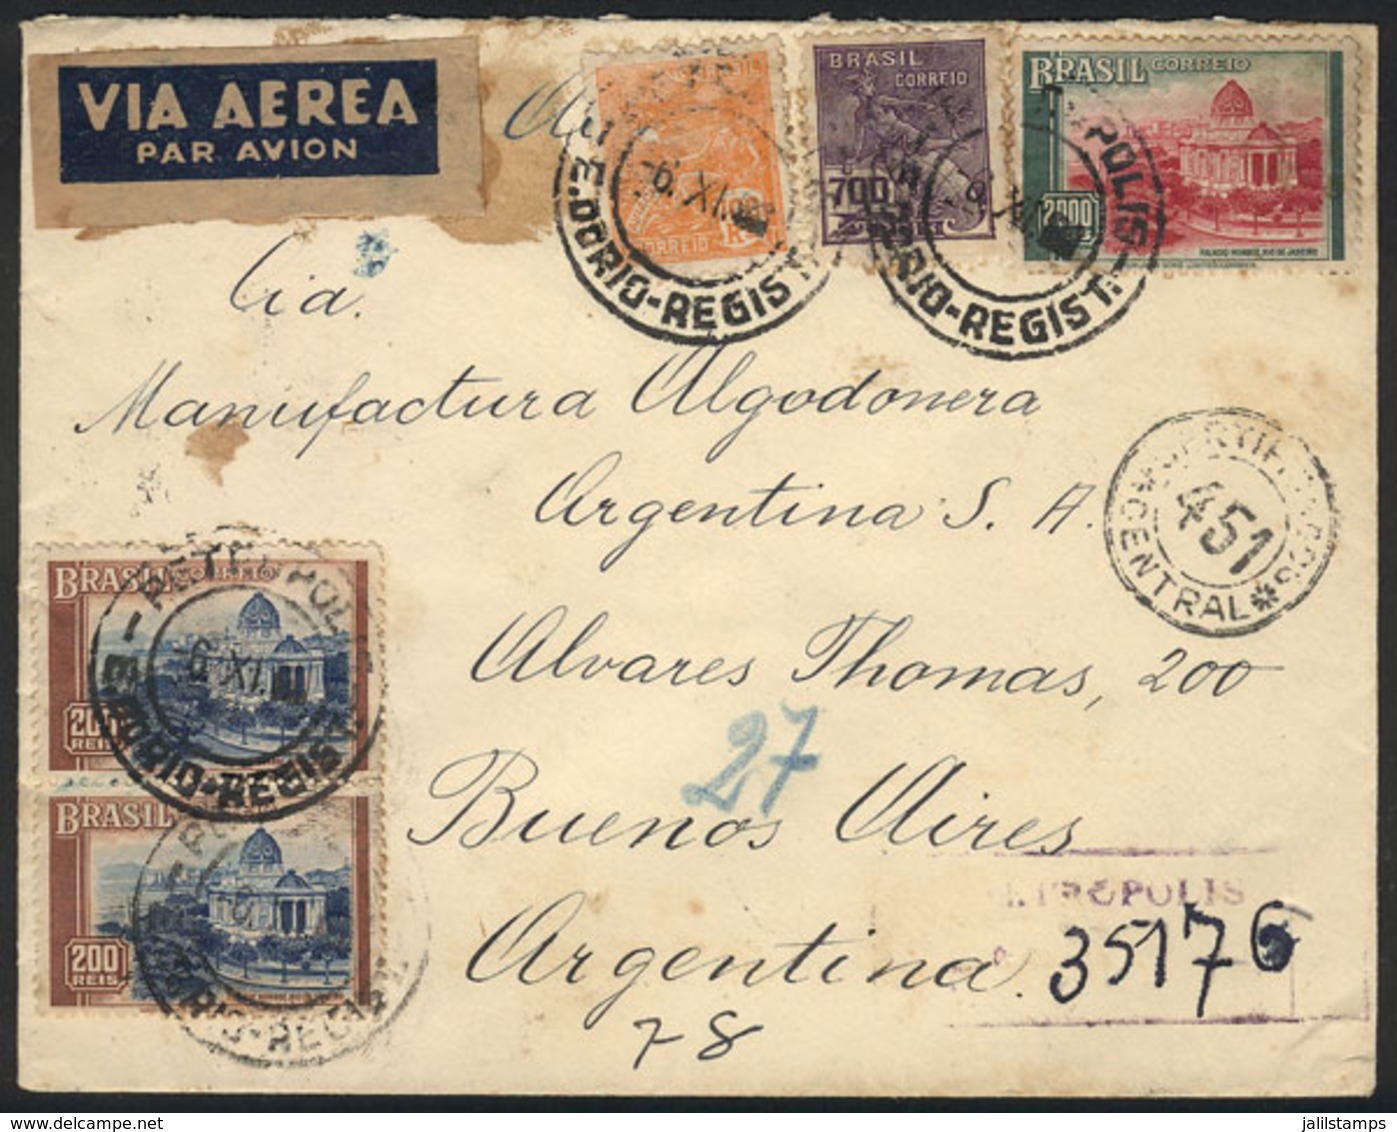 BRAZIL: Registered Cover With Good Postage For 3,200Rs. Sent From Petropolis To Argentina On 6/NO/1937, VF! - Prefilatelia